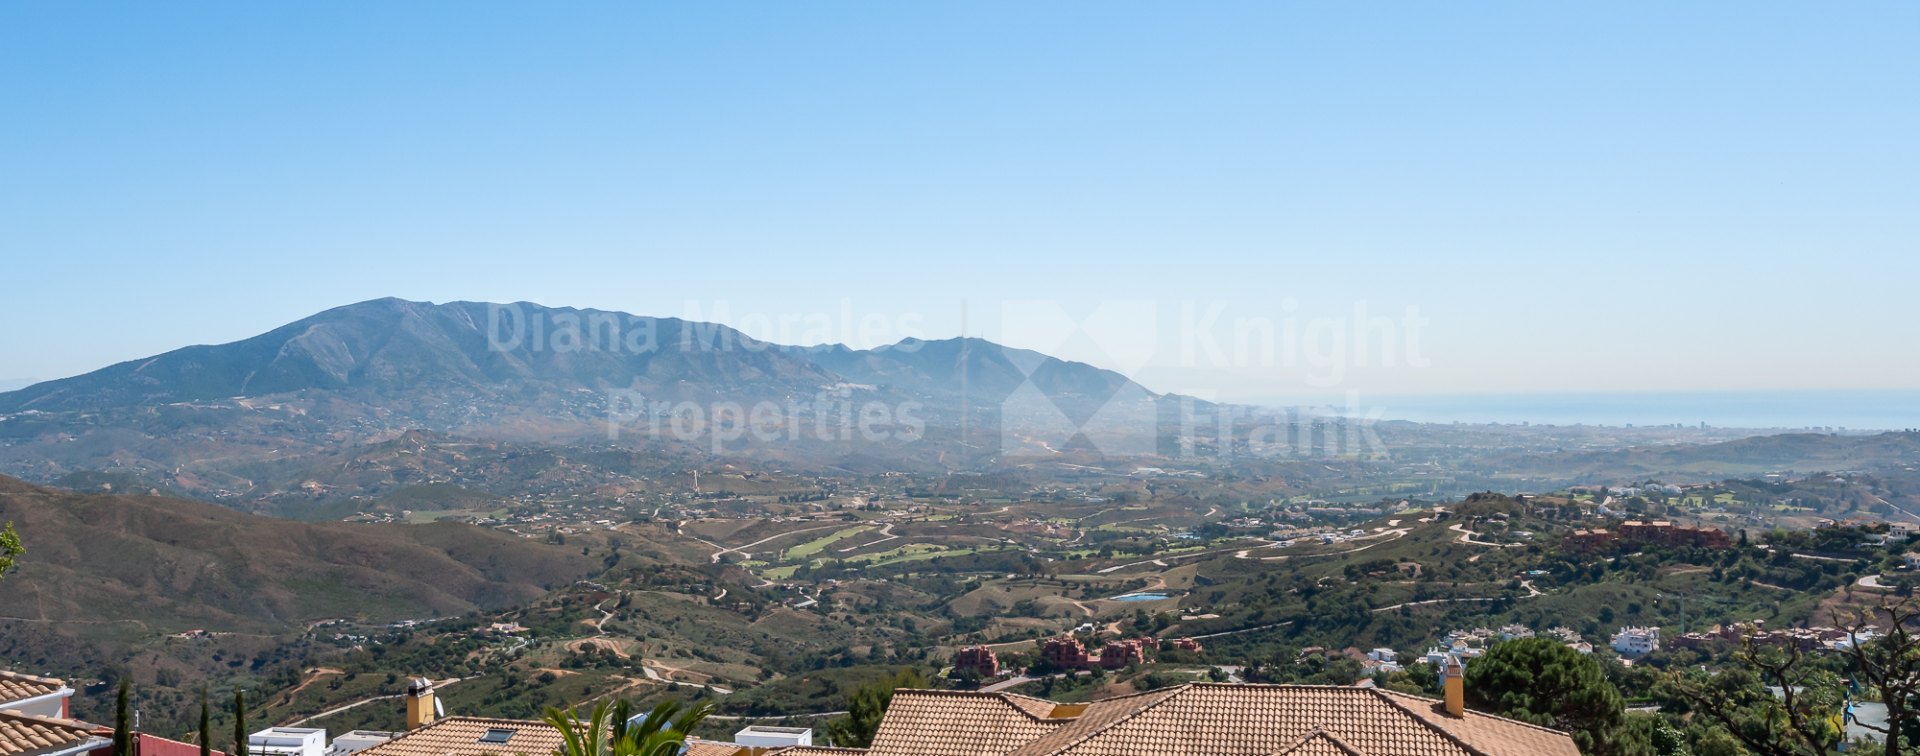 Oakhill Heights in La Mairena Ojén is an exquisite enclave with privileged views